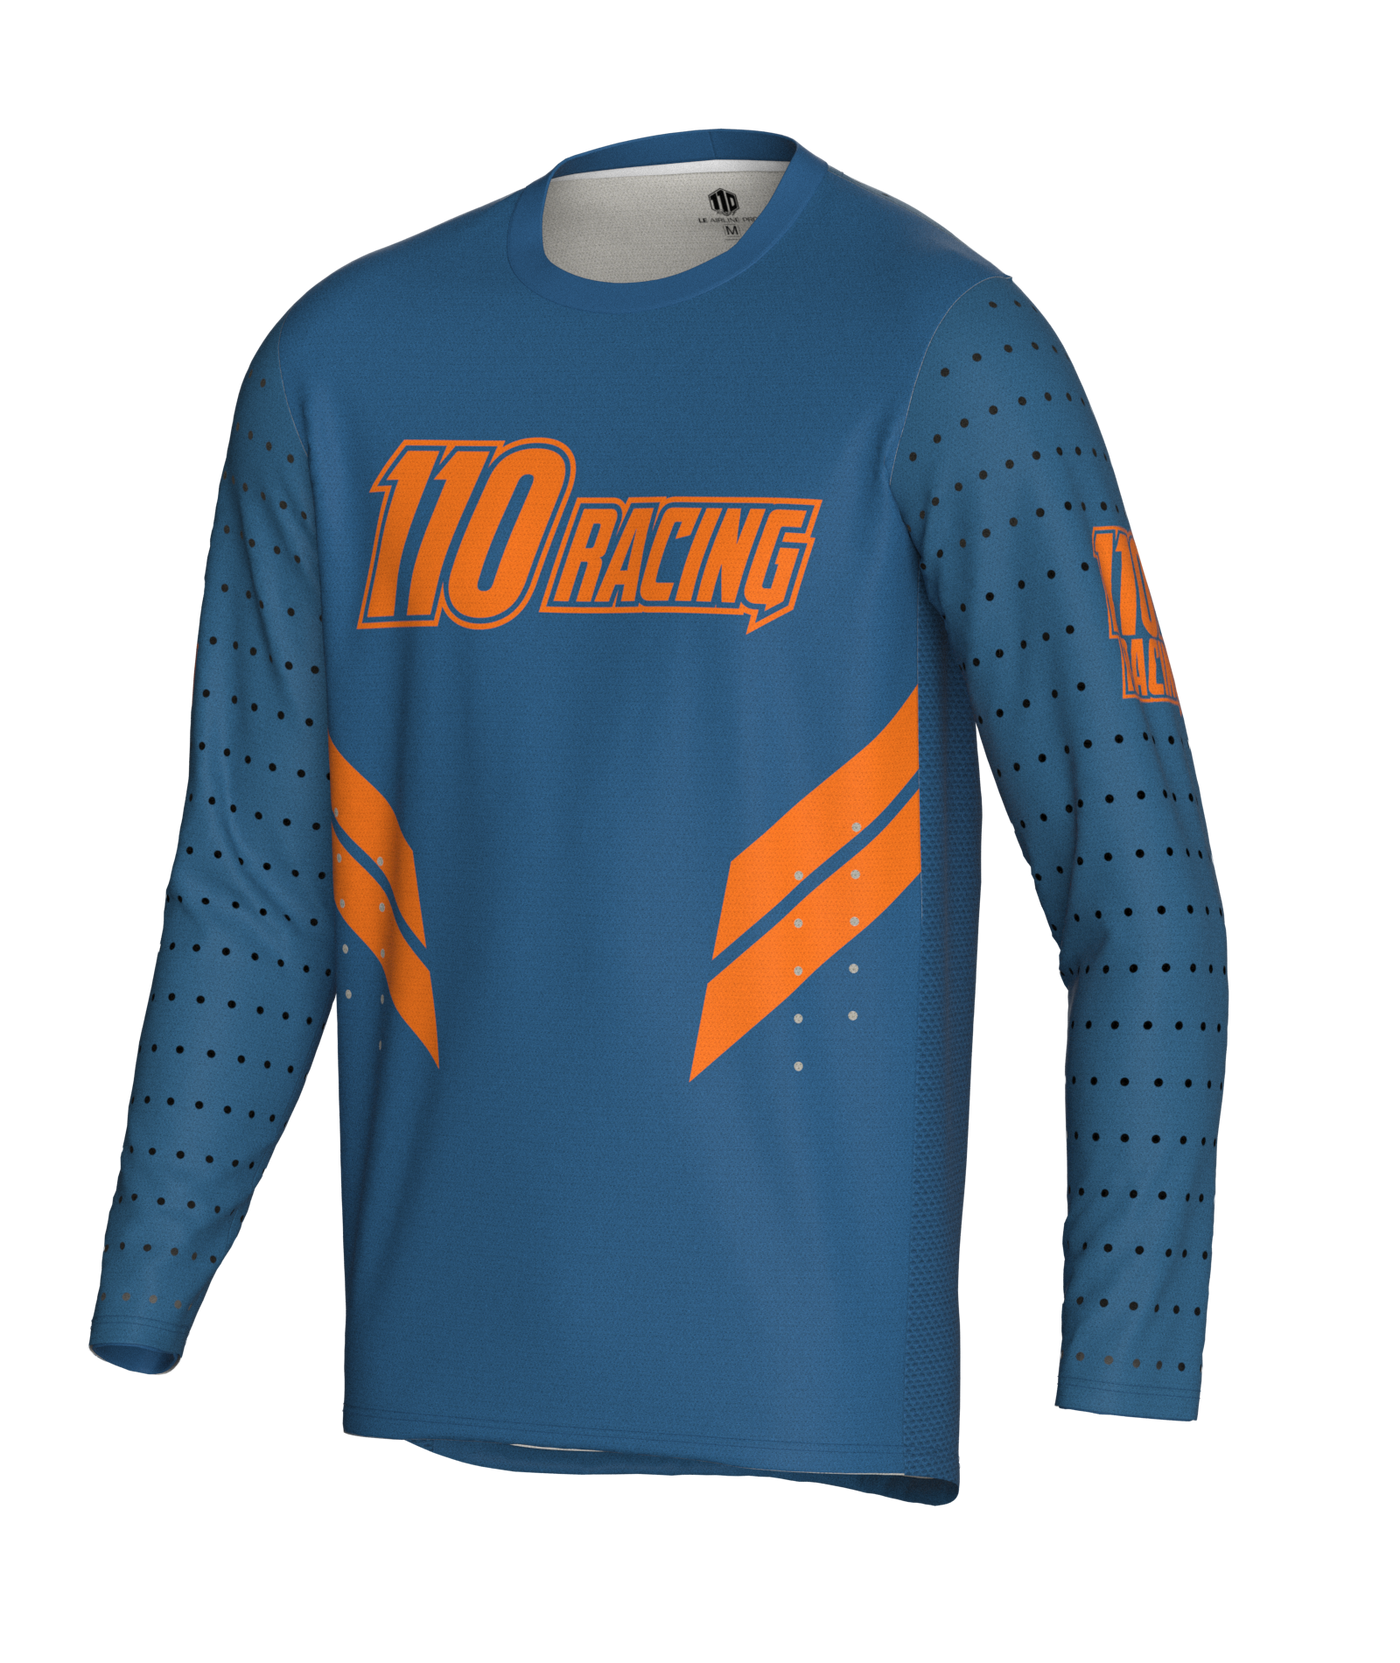 110 RACING // LE AIRLINE PRO